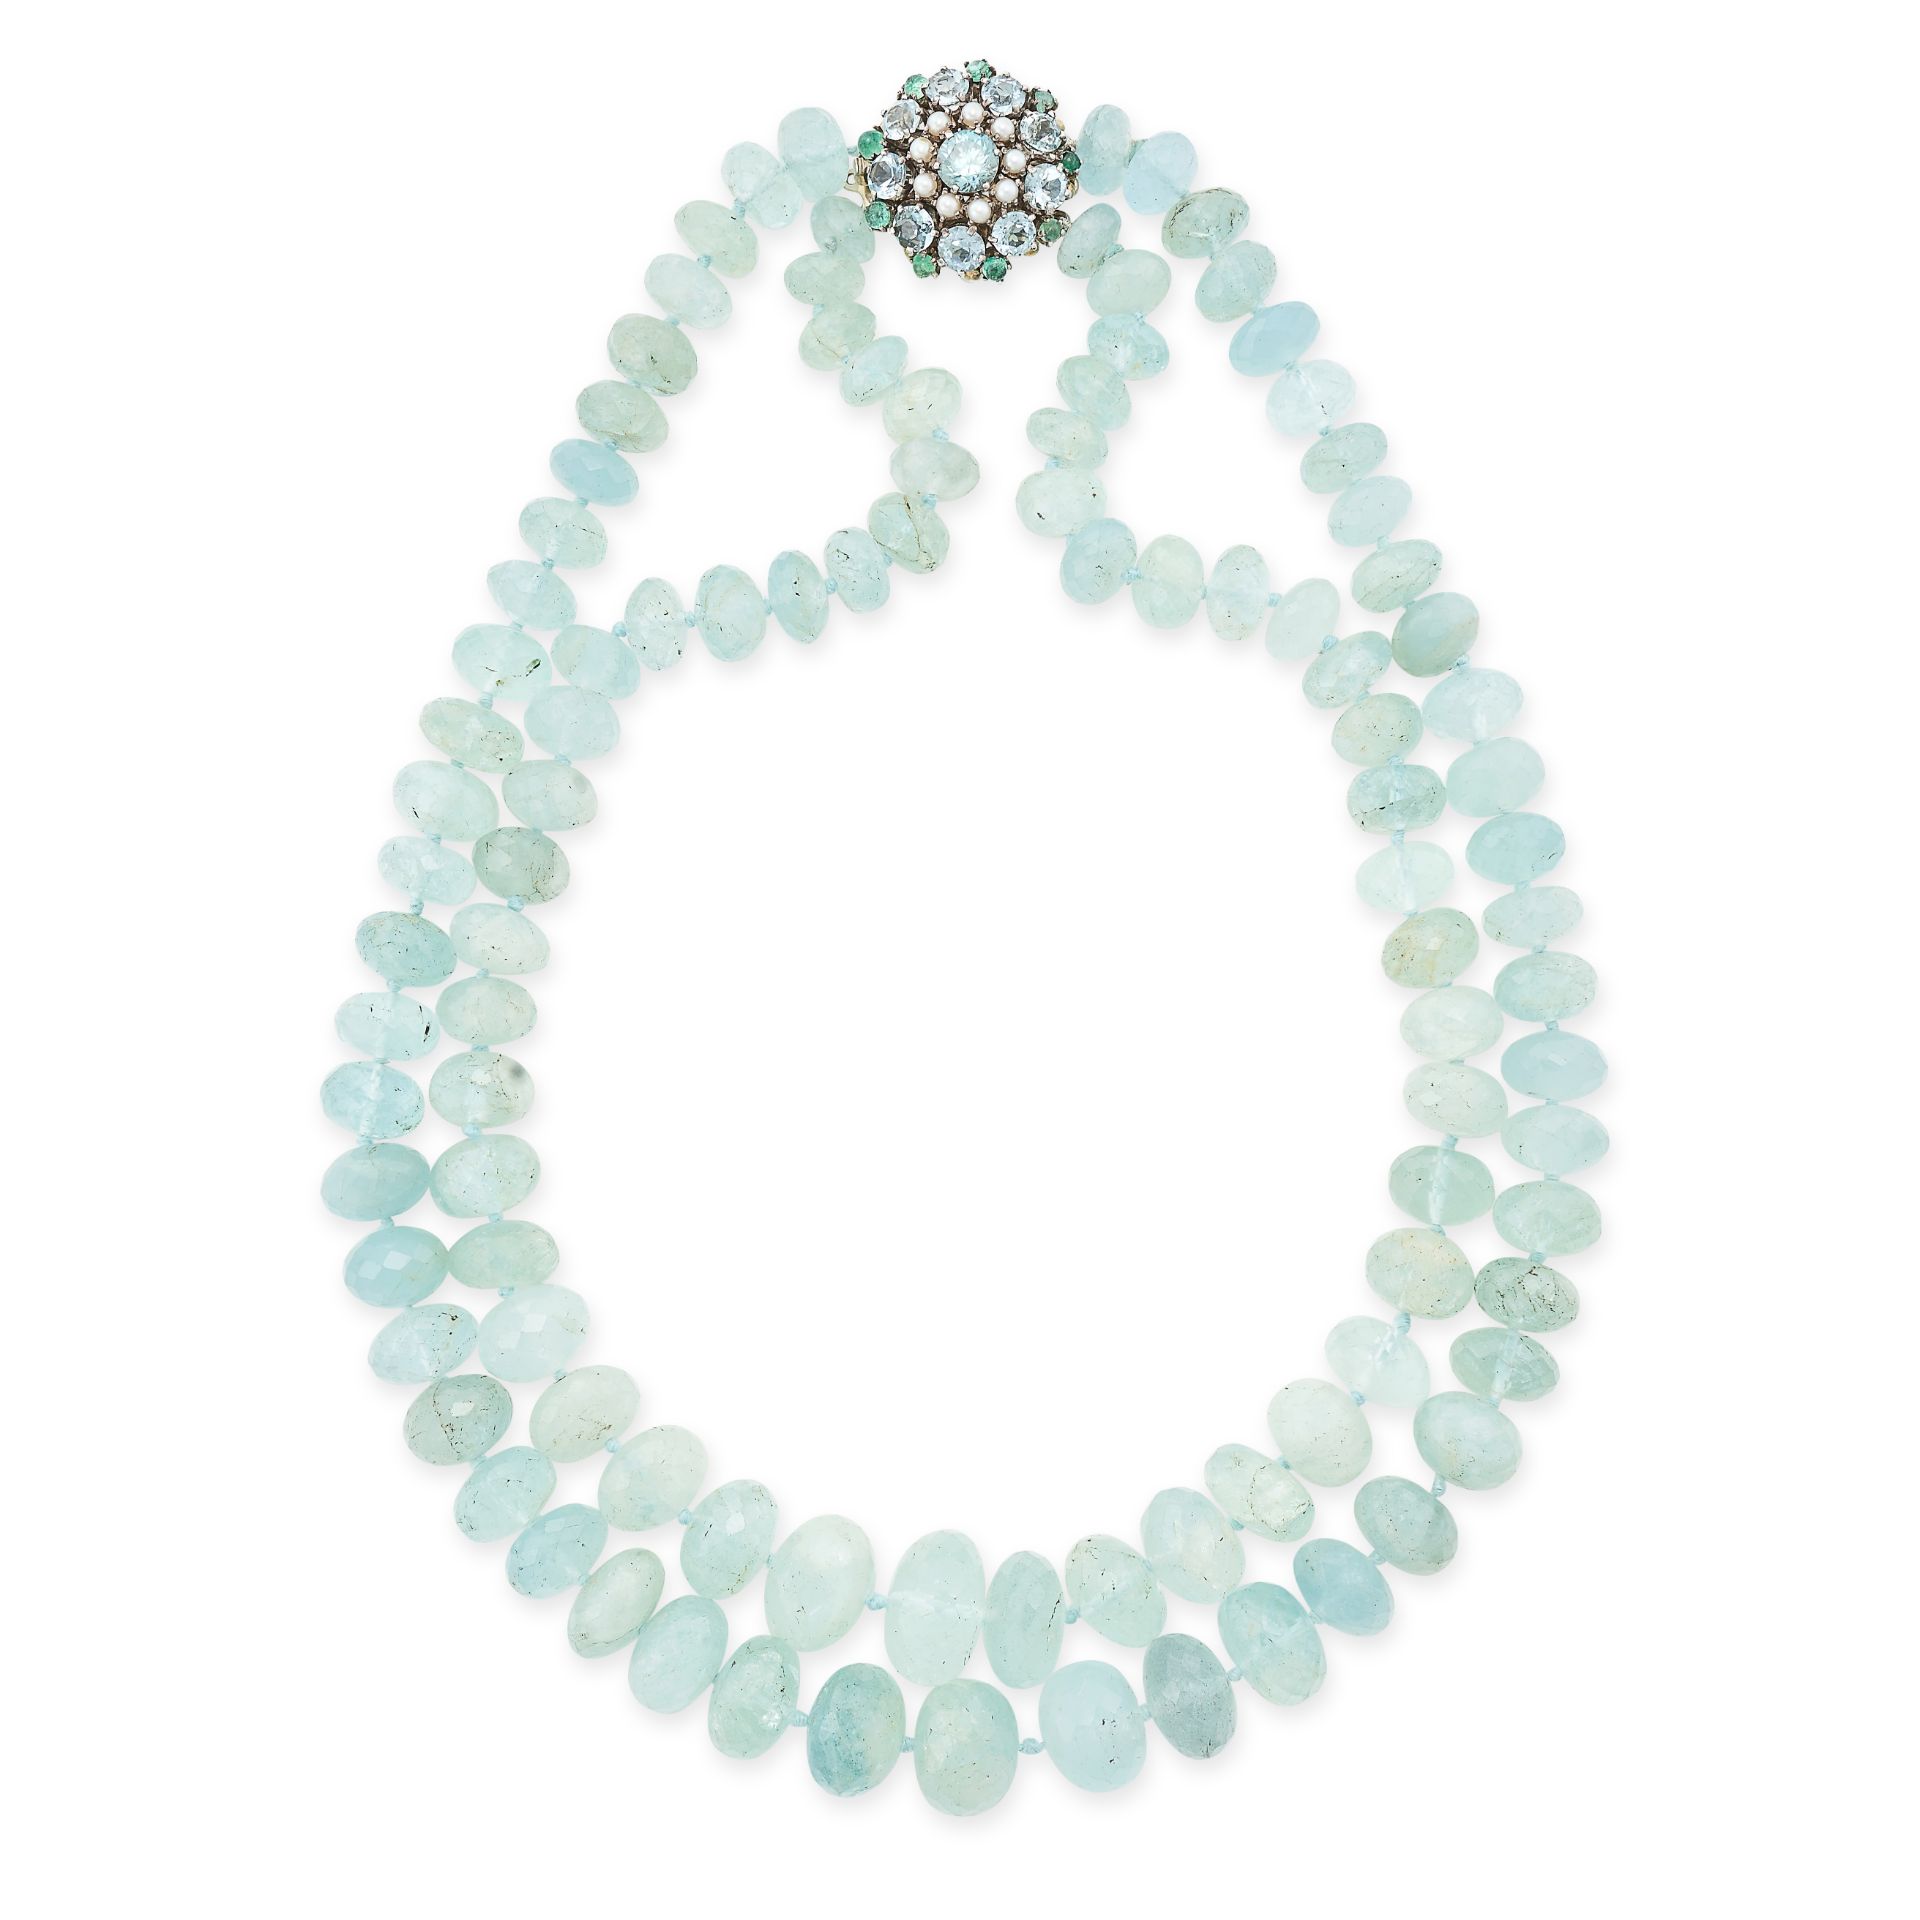 AN AQUAMARINE, EMERALD, PEARL AND ZIRCON NECKLACE comprising two rows of faceted aquamarine beads